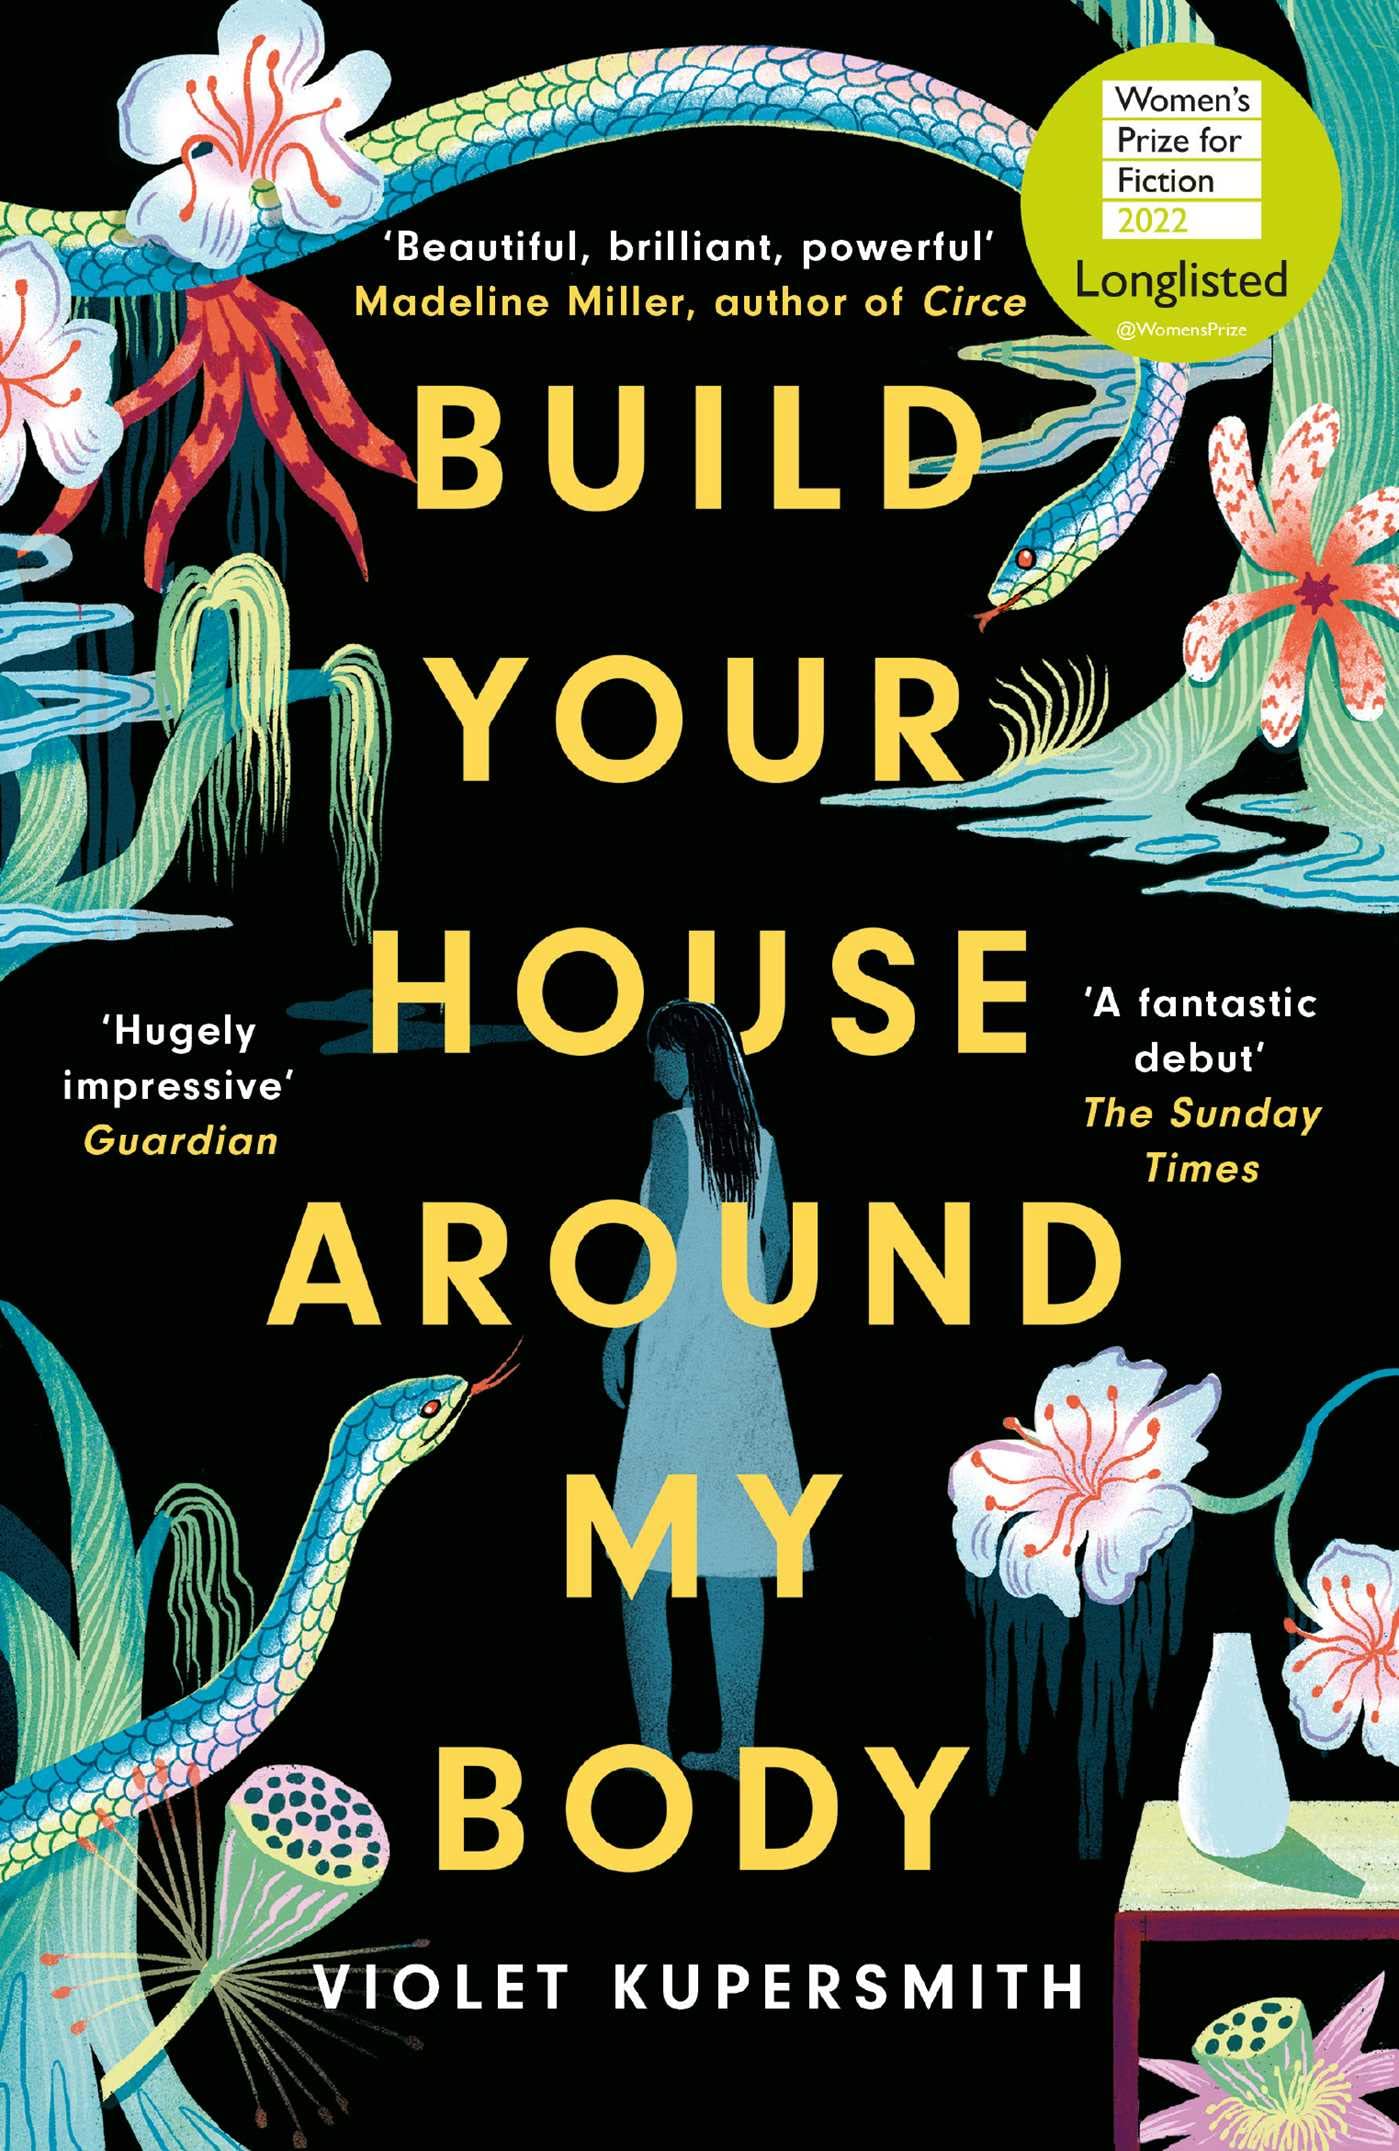 Build your House Around My Body by Violet Kupersmith